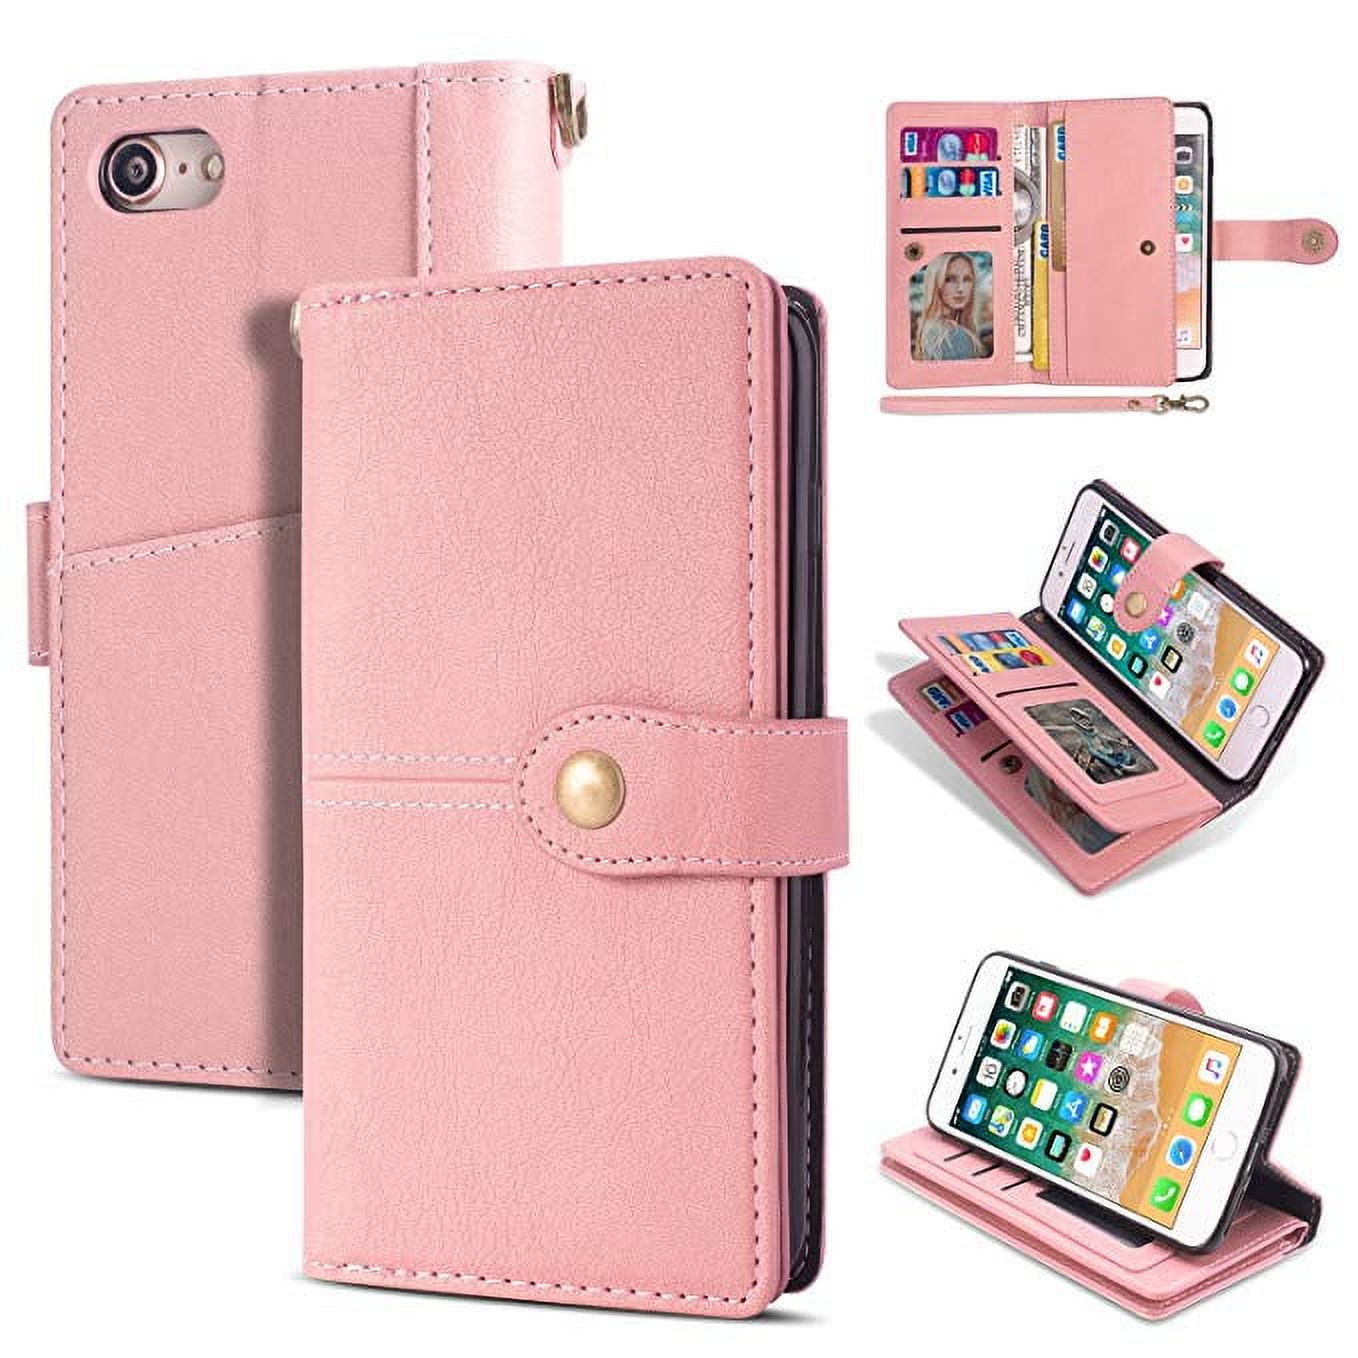 iPhone 6S Plus Wallet Case, iPhone 6 Plus Case, Allytech Vintage Style PU  Leather Folio Flop Secure Fit Magnetic Closure Folding Case with Wallet/  Card Holder For iPhone 6S Plus/ iPhone 6